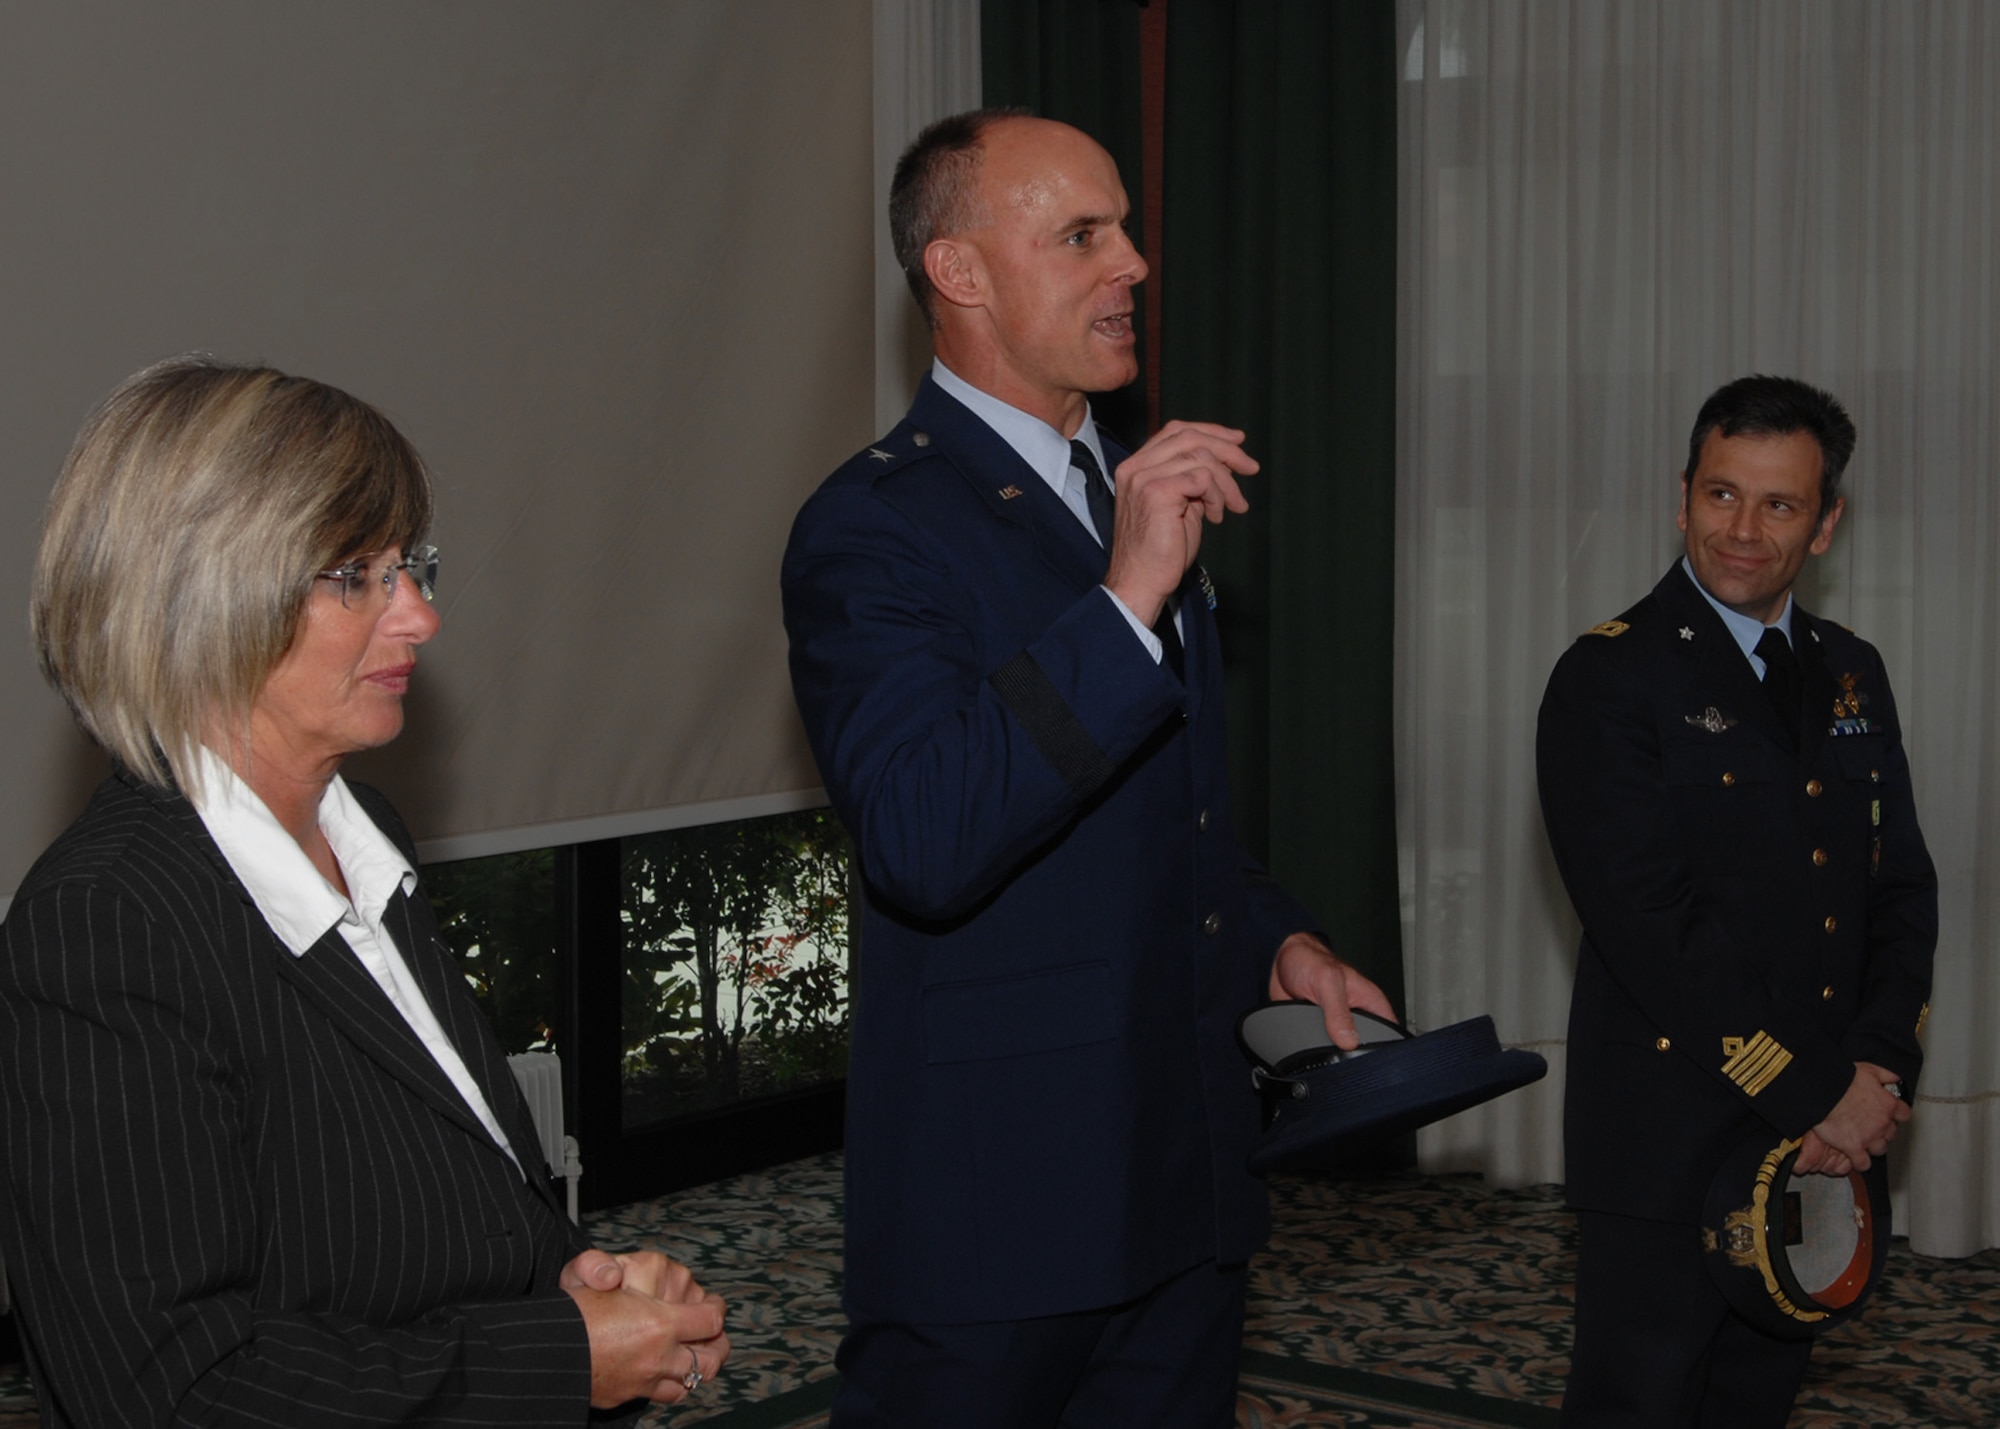 Brig. Gen. Craig Franklin, 31st Fighter Wing commander, uses his Italian language skills to greet the 12 Italian community leaders prior to their induction into the 31st FW Honorary Squadron Commander Program held at the La Bella Vista Club at Aviano Air Base, Italy, May 8, 2009.  Leading up to the ceremony, inductees were met by General Franklin, Col. Filippo Zampella, right, the Pagliano e Gori Airport commander, and their respective unit commanders for a brief social. Luisa Merlo, 31st FW public affairs specialist, left, provided translation support for the commander.  (U.S. Air Force photo/Staff Sgt. Patrick Dixon)